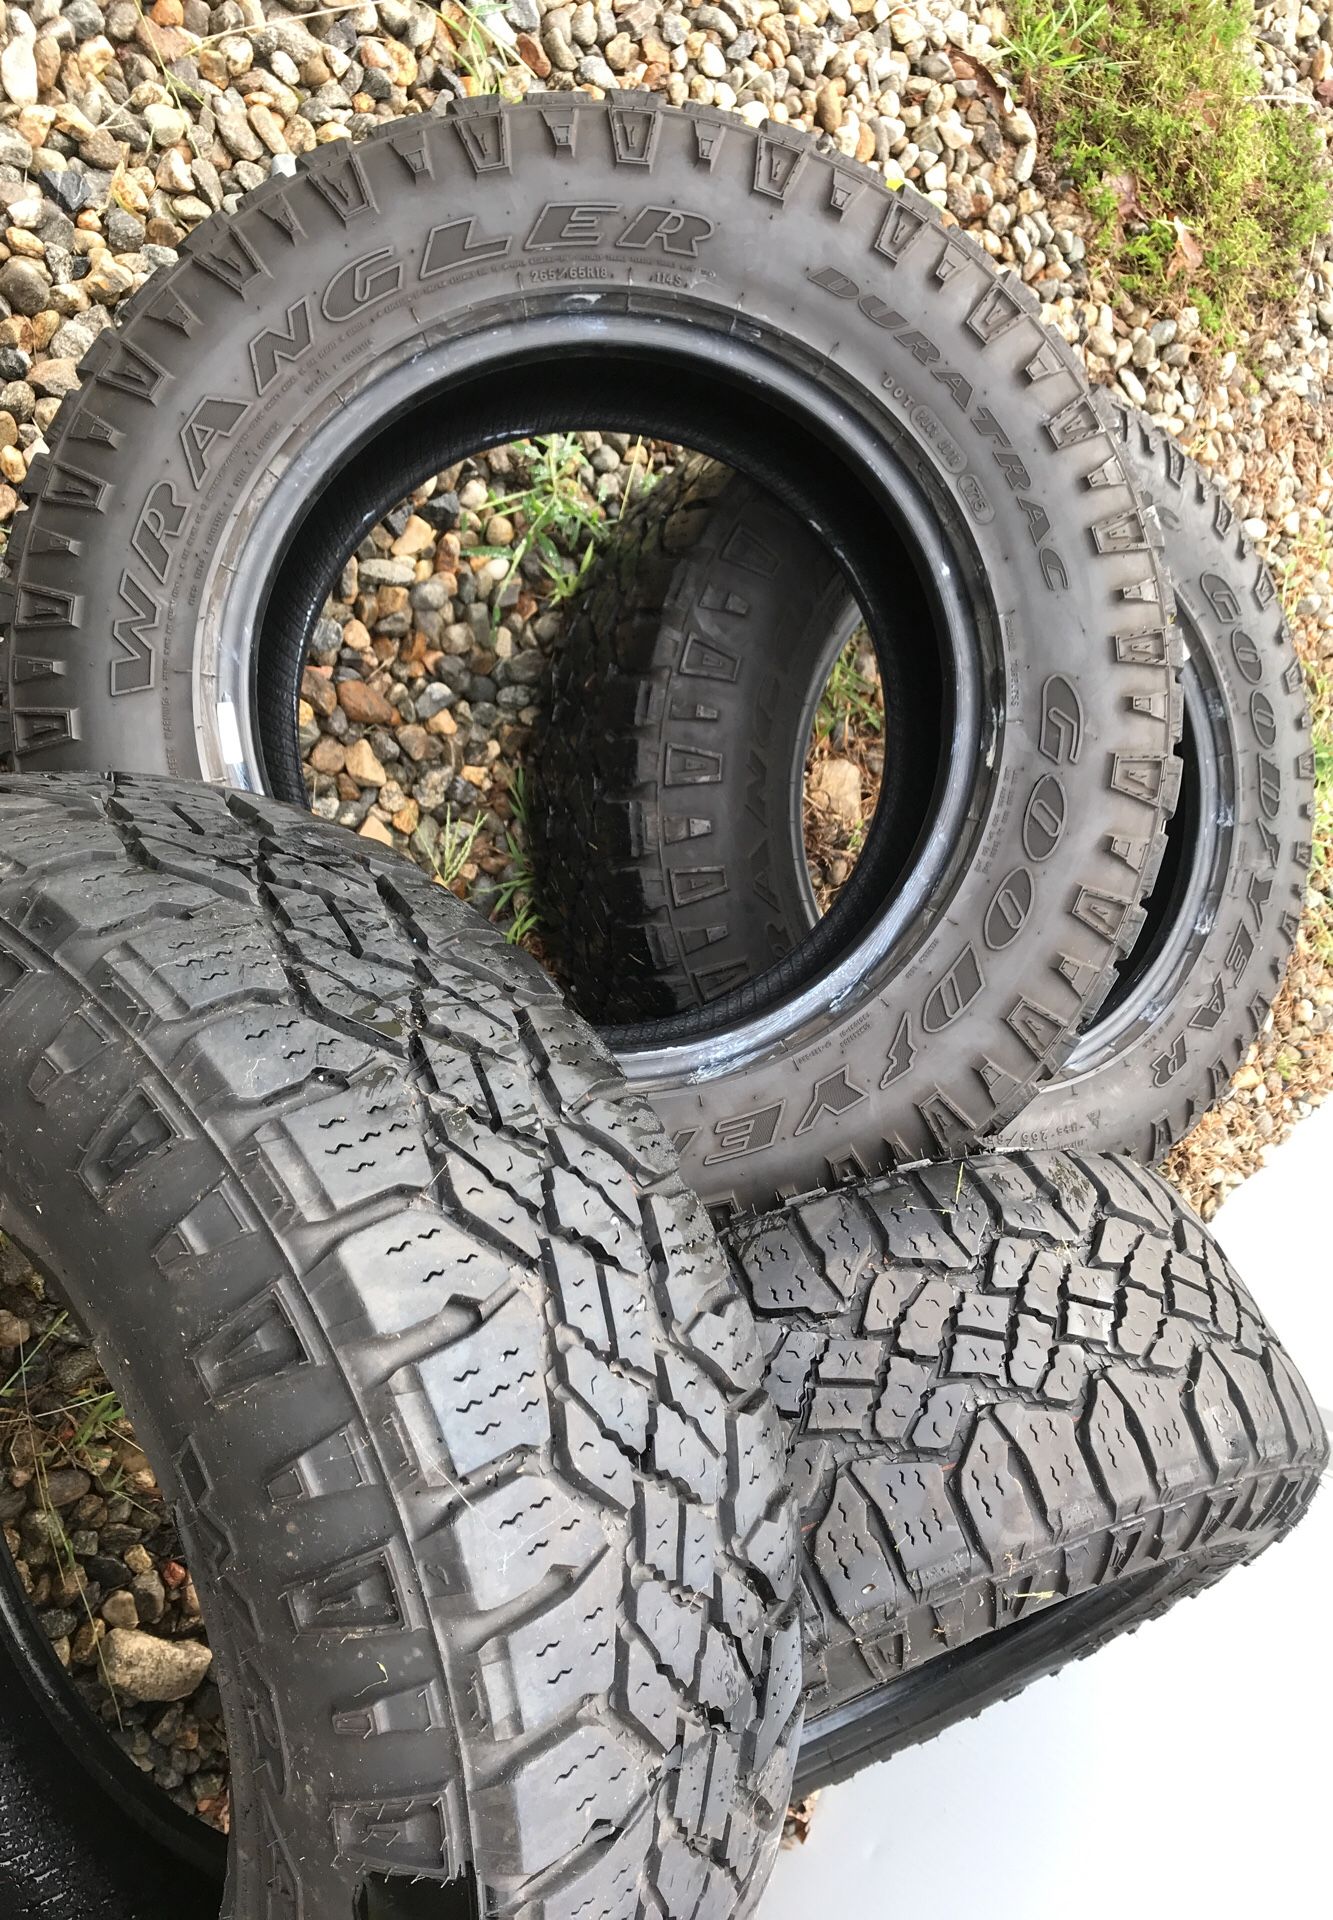 Set of 4 Goodyear wrangler duratrac tires 265/65r18 good condition 75%  tread left $275 for Sale in Naugatuck, CT - OfferUp